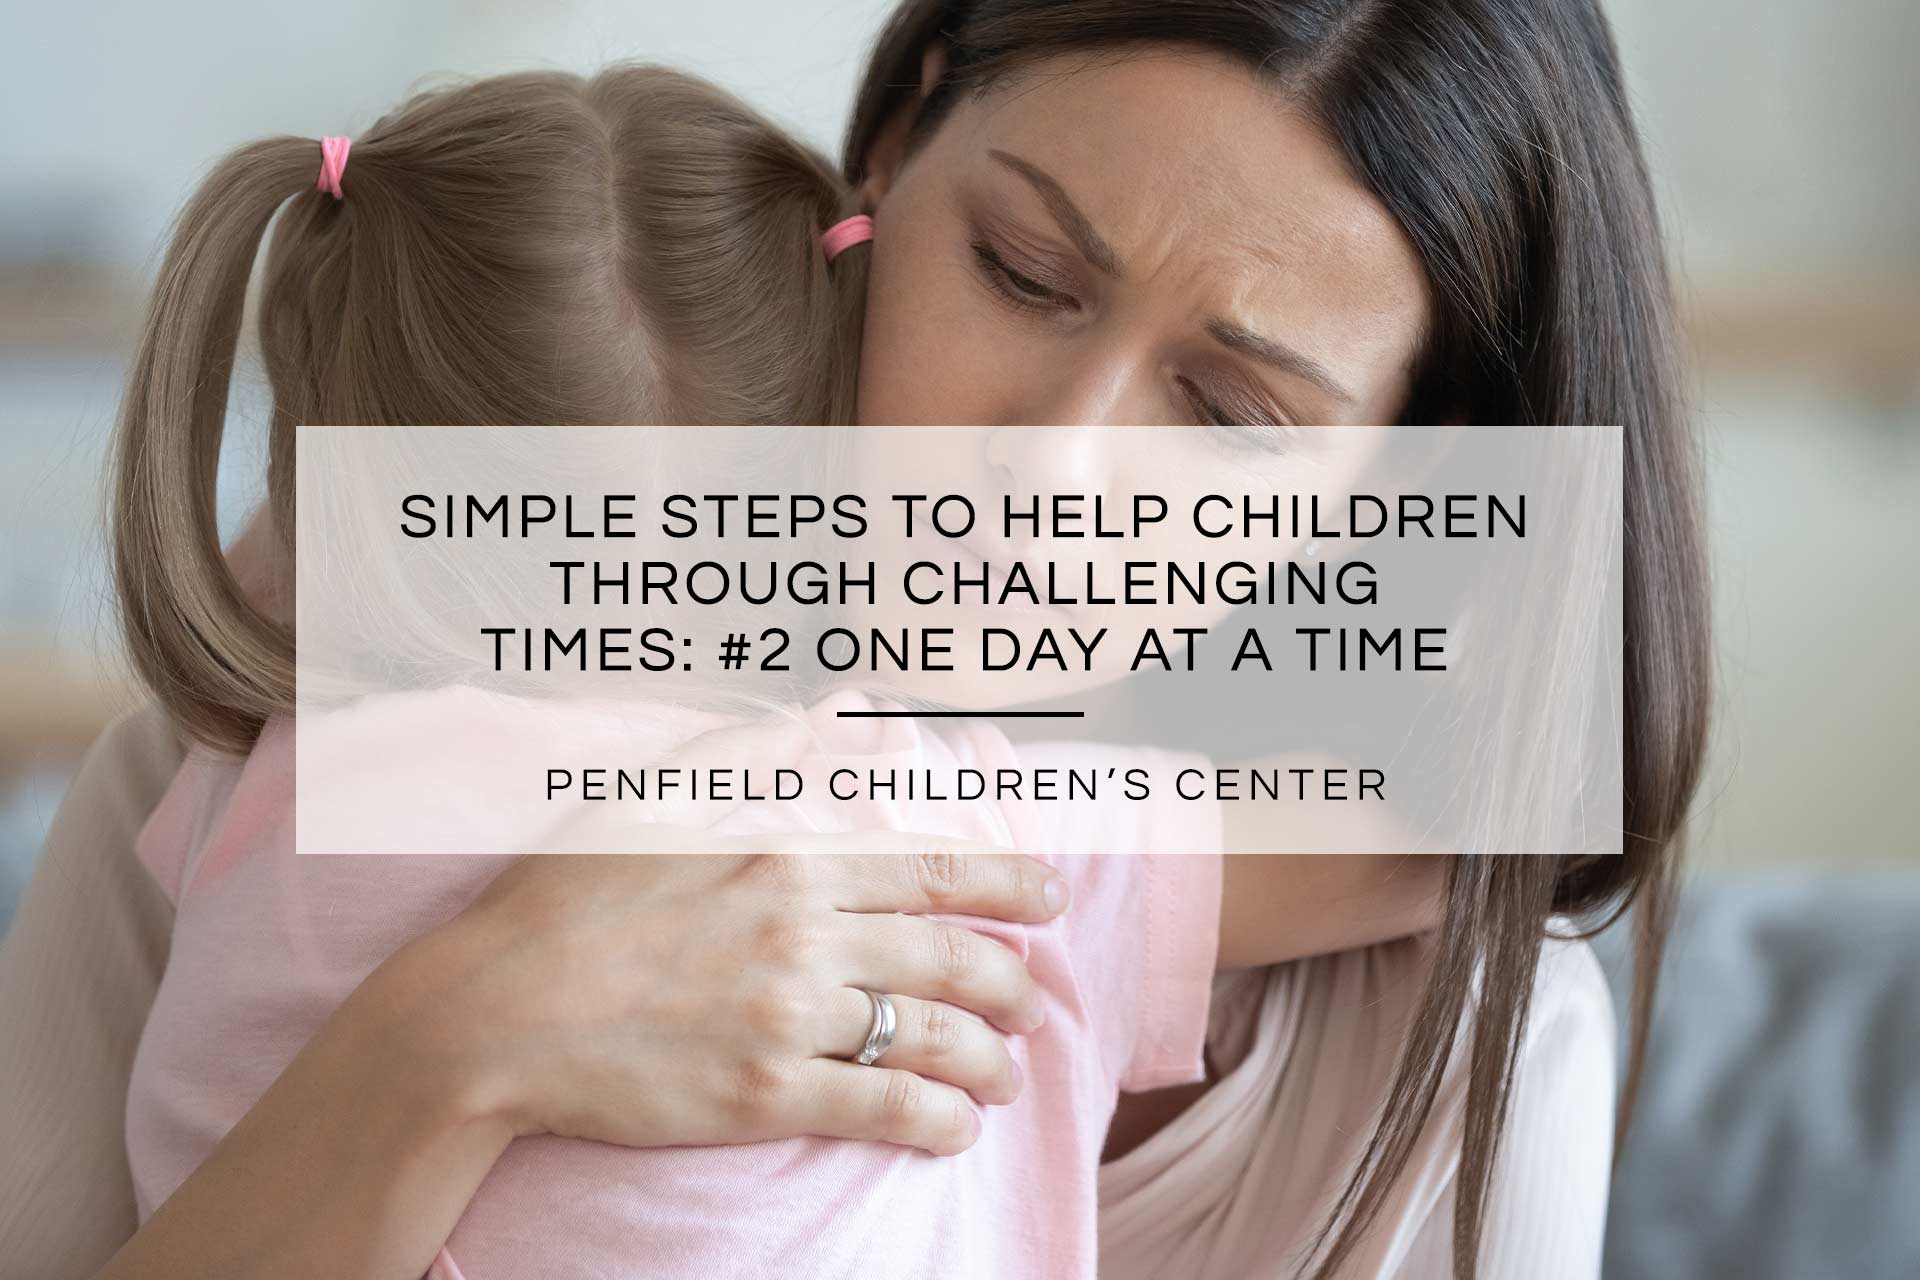 Simple Steps to Help Children Through Challenging Times: #2 One Day at a Time